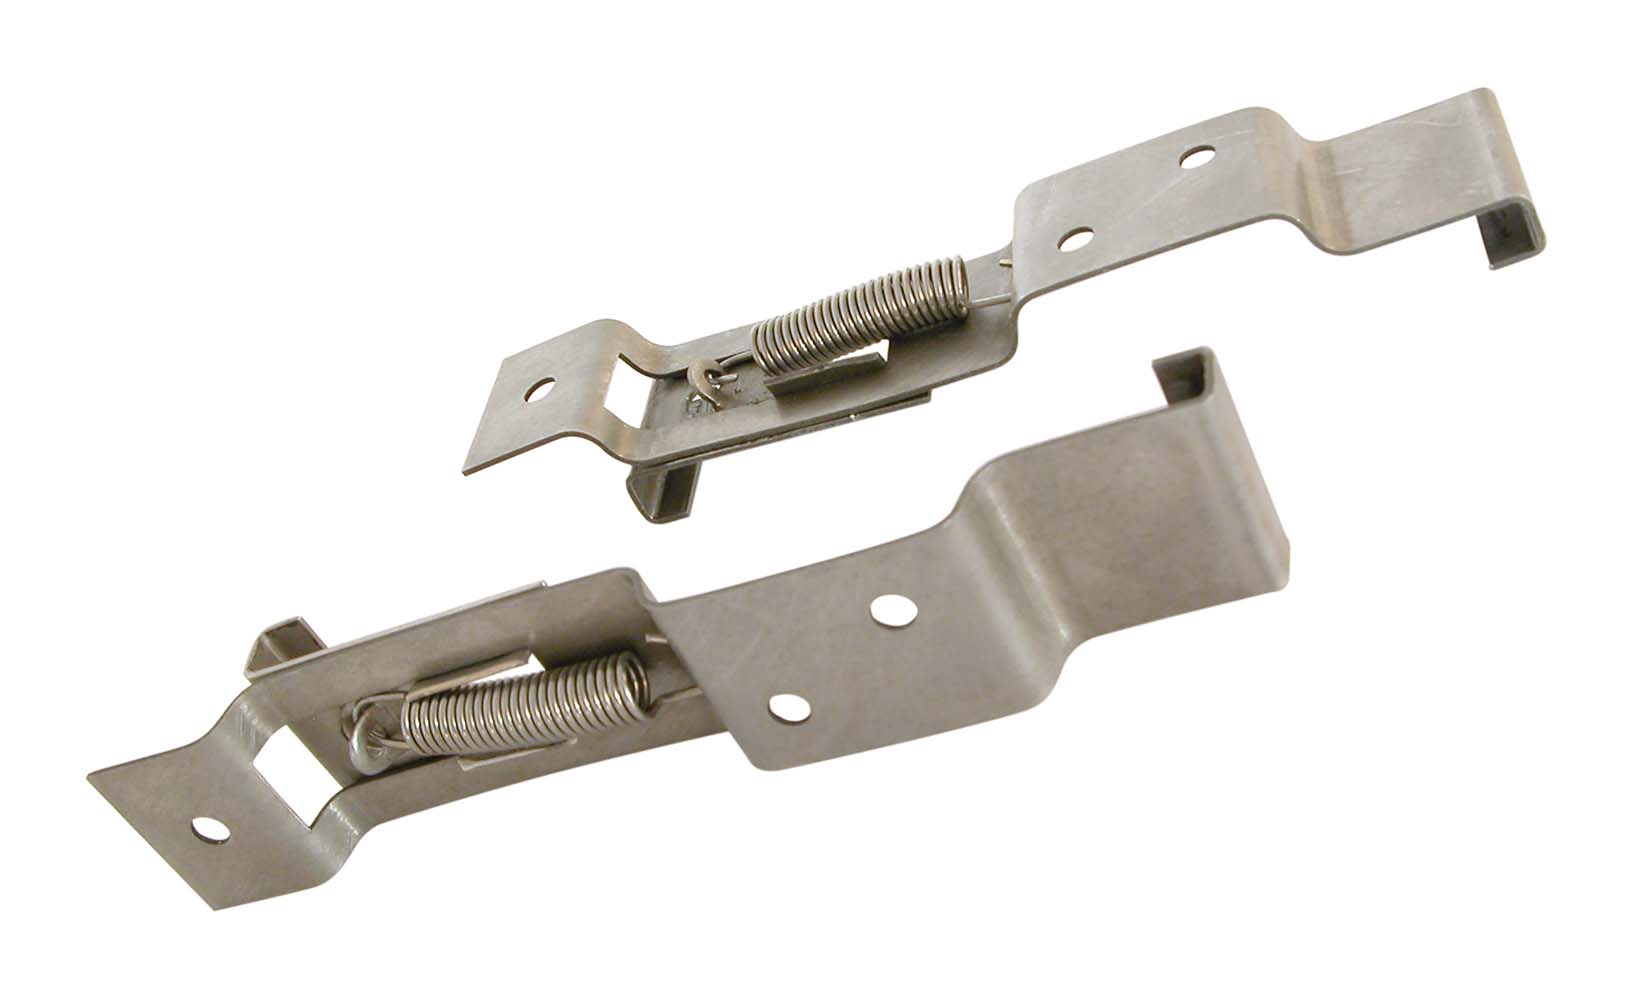 5163003 A set of 2 sturdy numberplate clamps. Suitable for attaching a registration plate (52x11 cm).